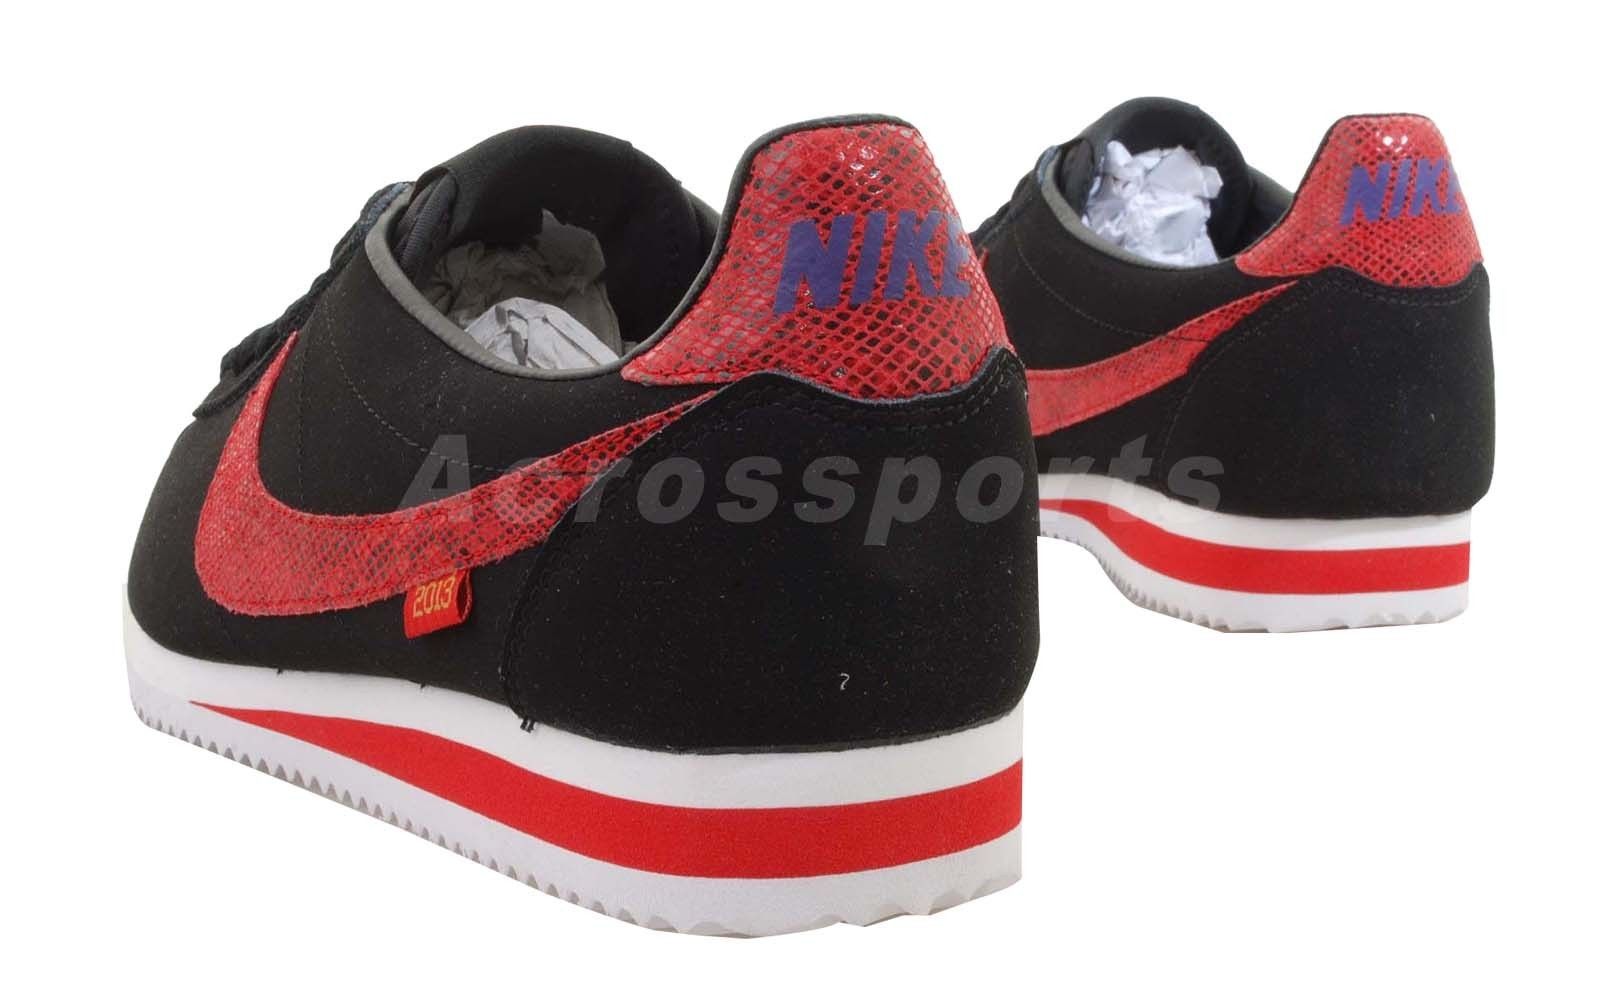 Nike Cortez "Year of the Snake" SneakerNews.com